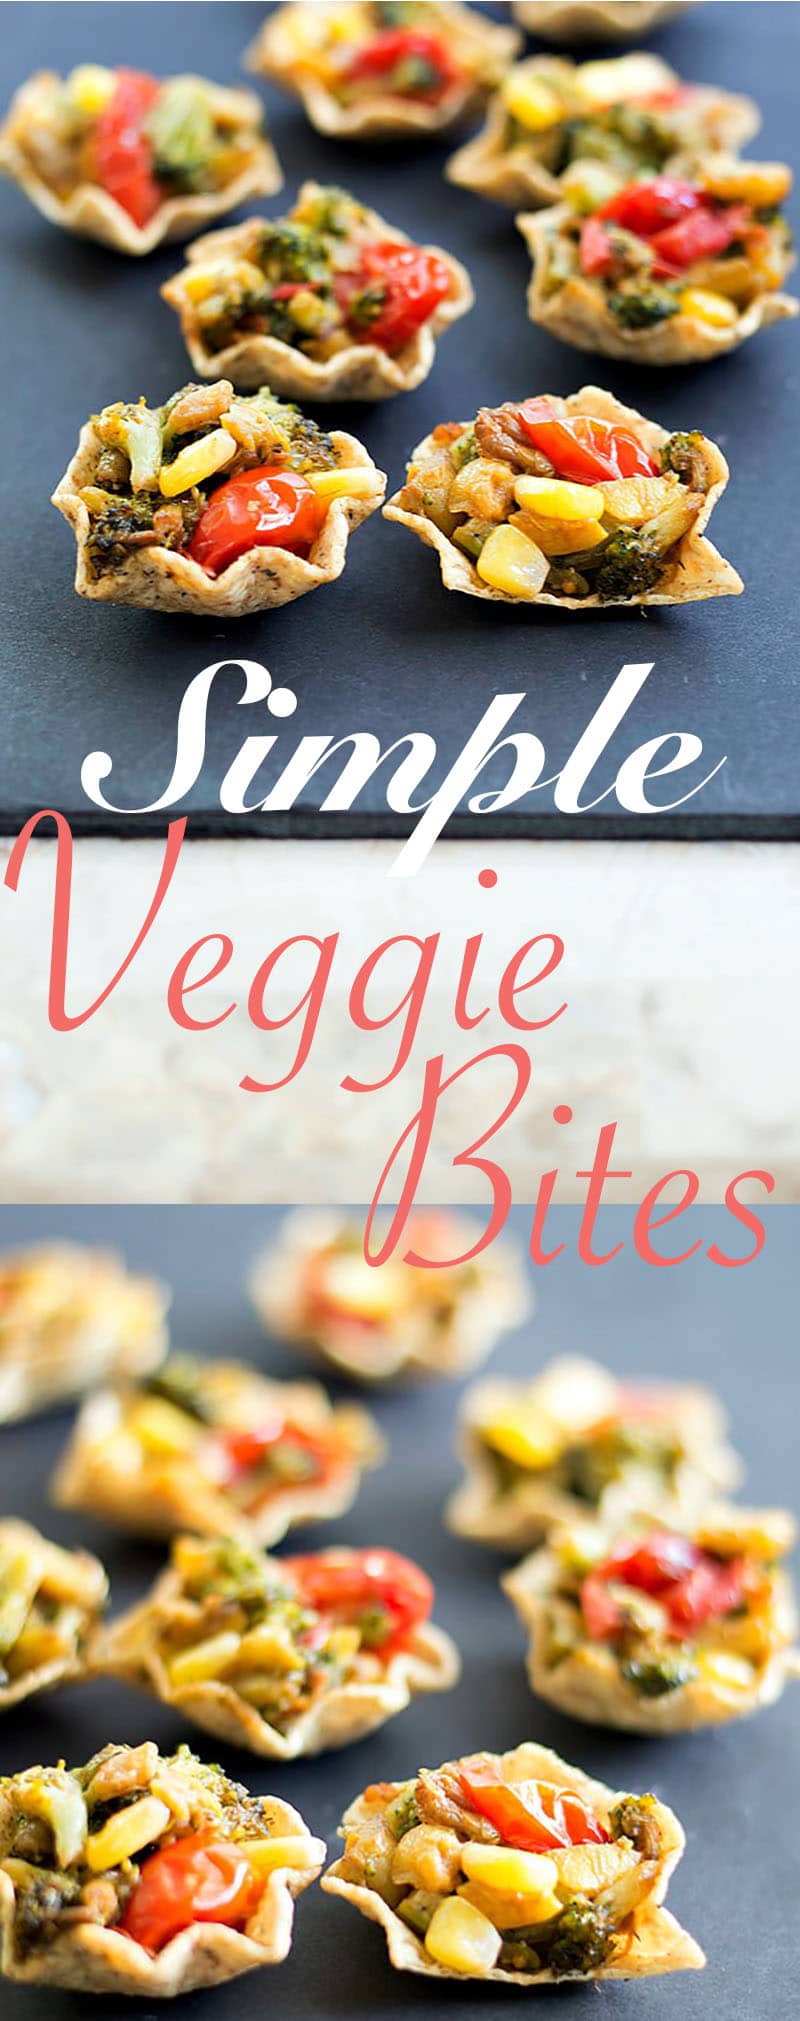 Simple veggie bites that are made with fresh veggies and dry herbs, they make eating chips a slightly healthier sport. Vegan snack that even kids can enjoy.